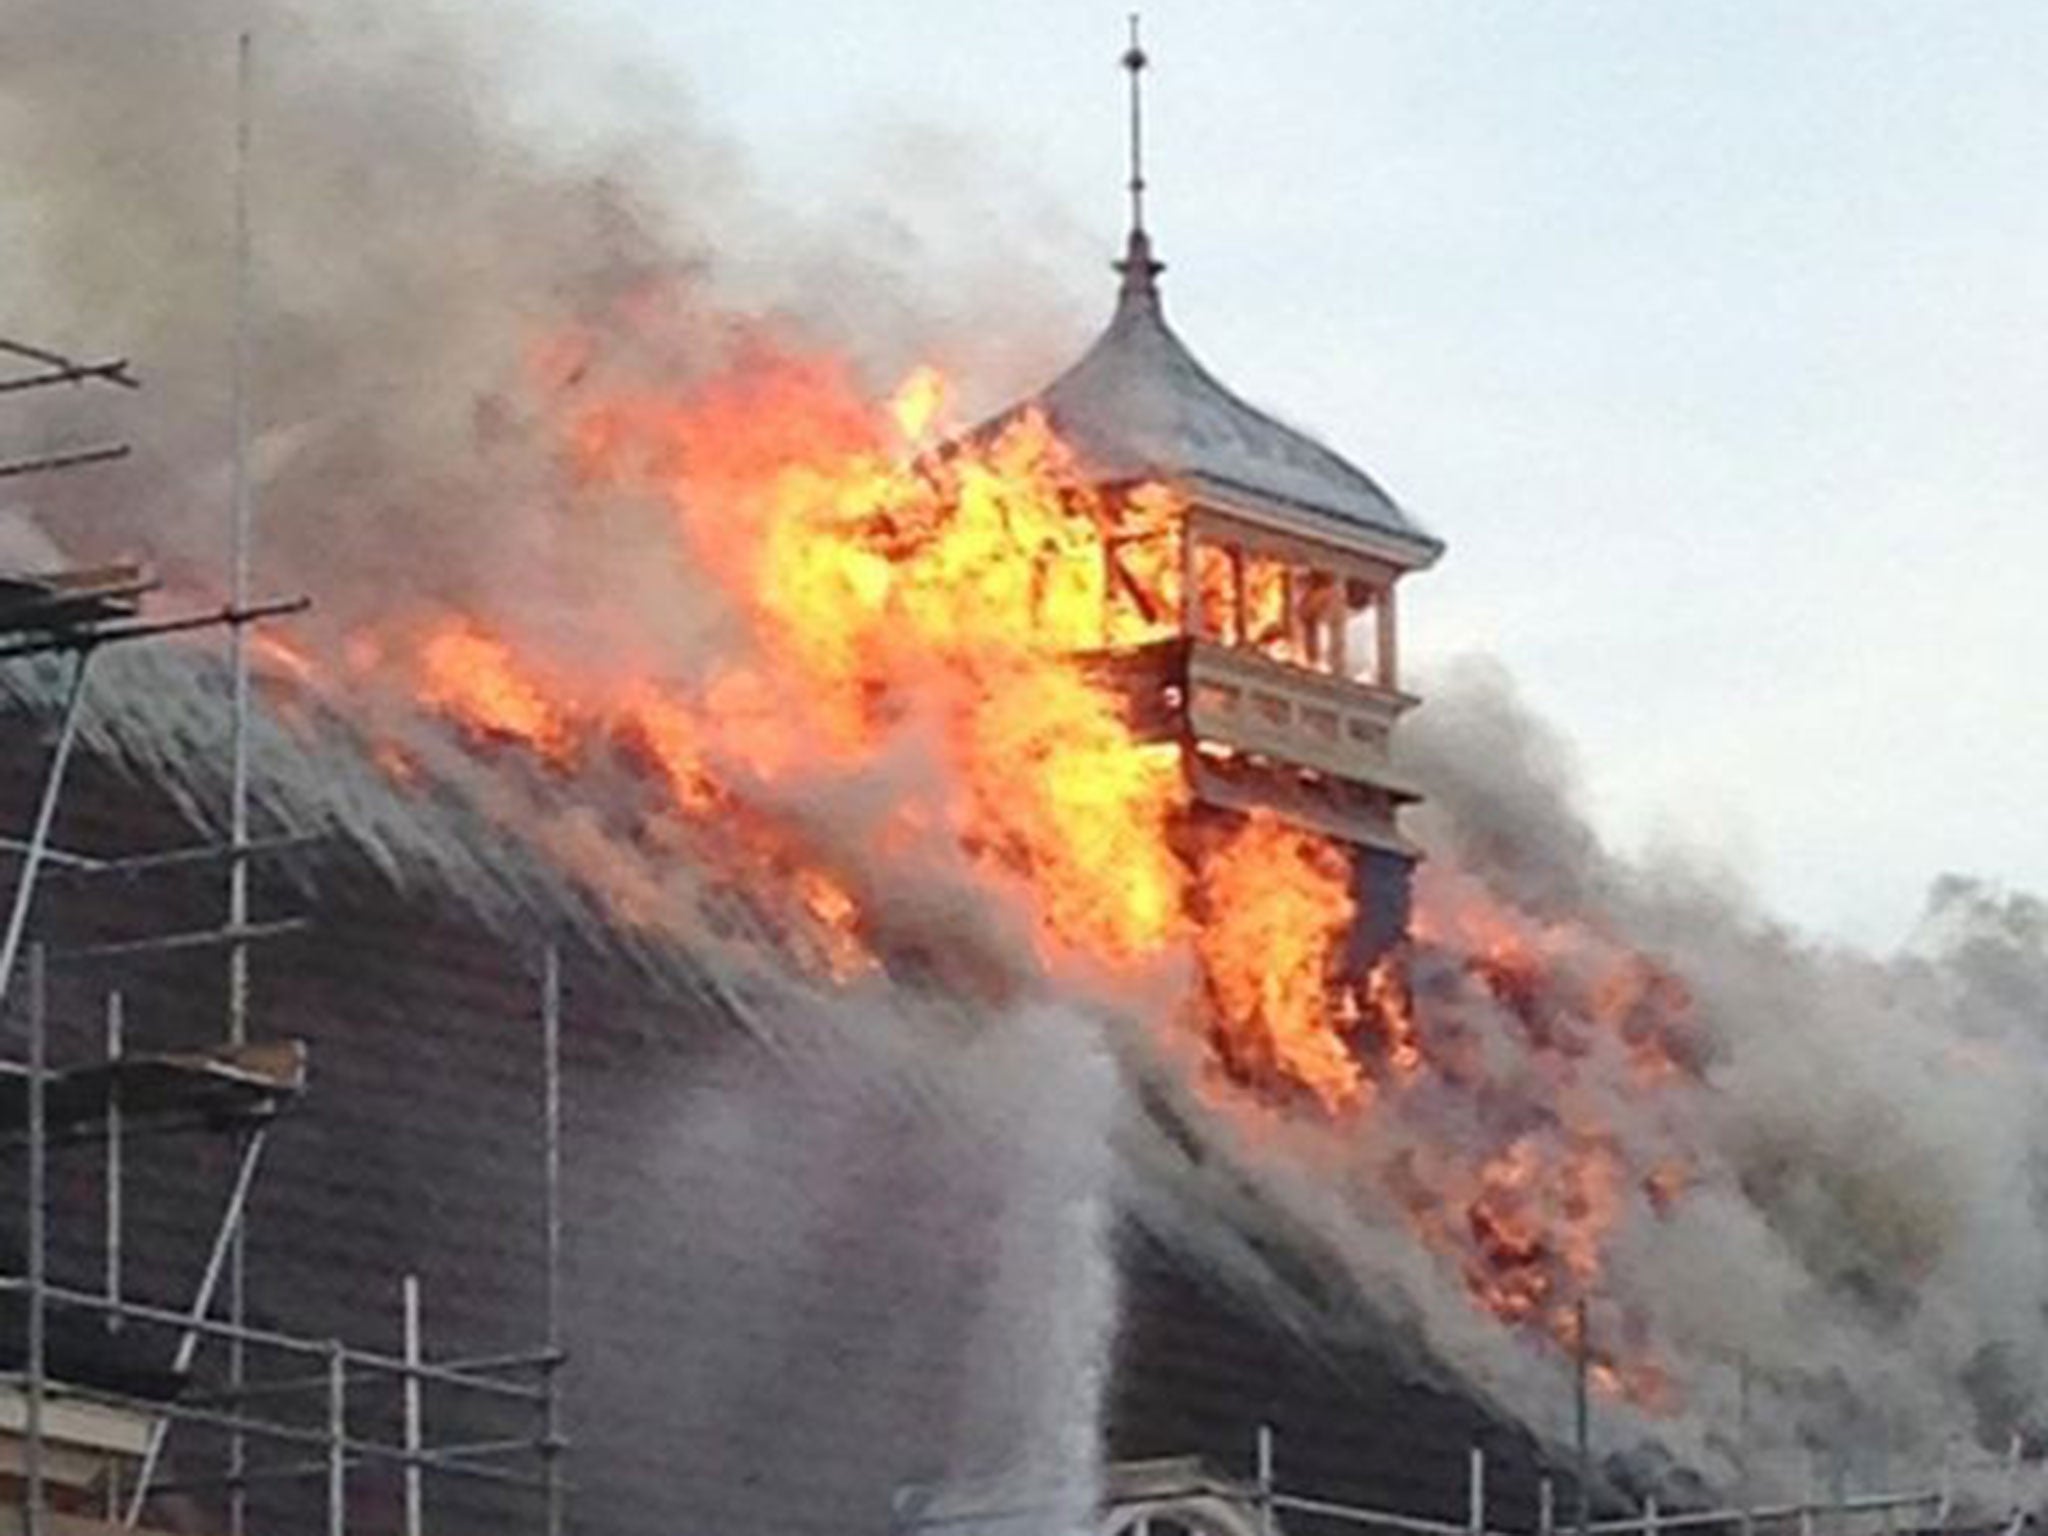 The fire appeared to start in the Battersea Arts Centre's roof